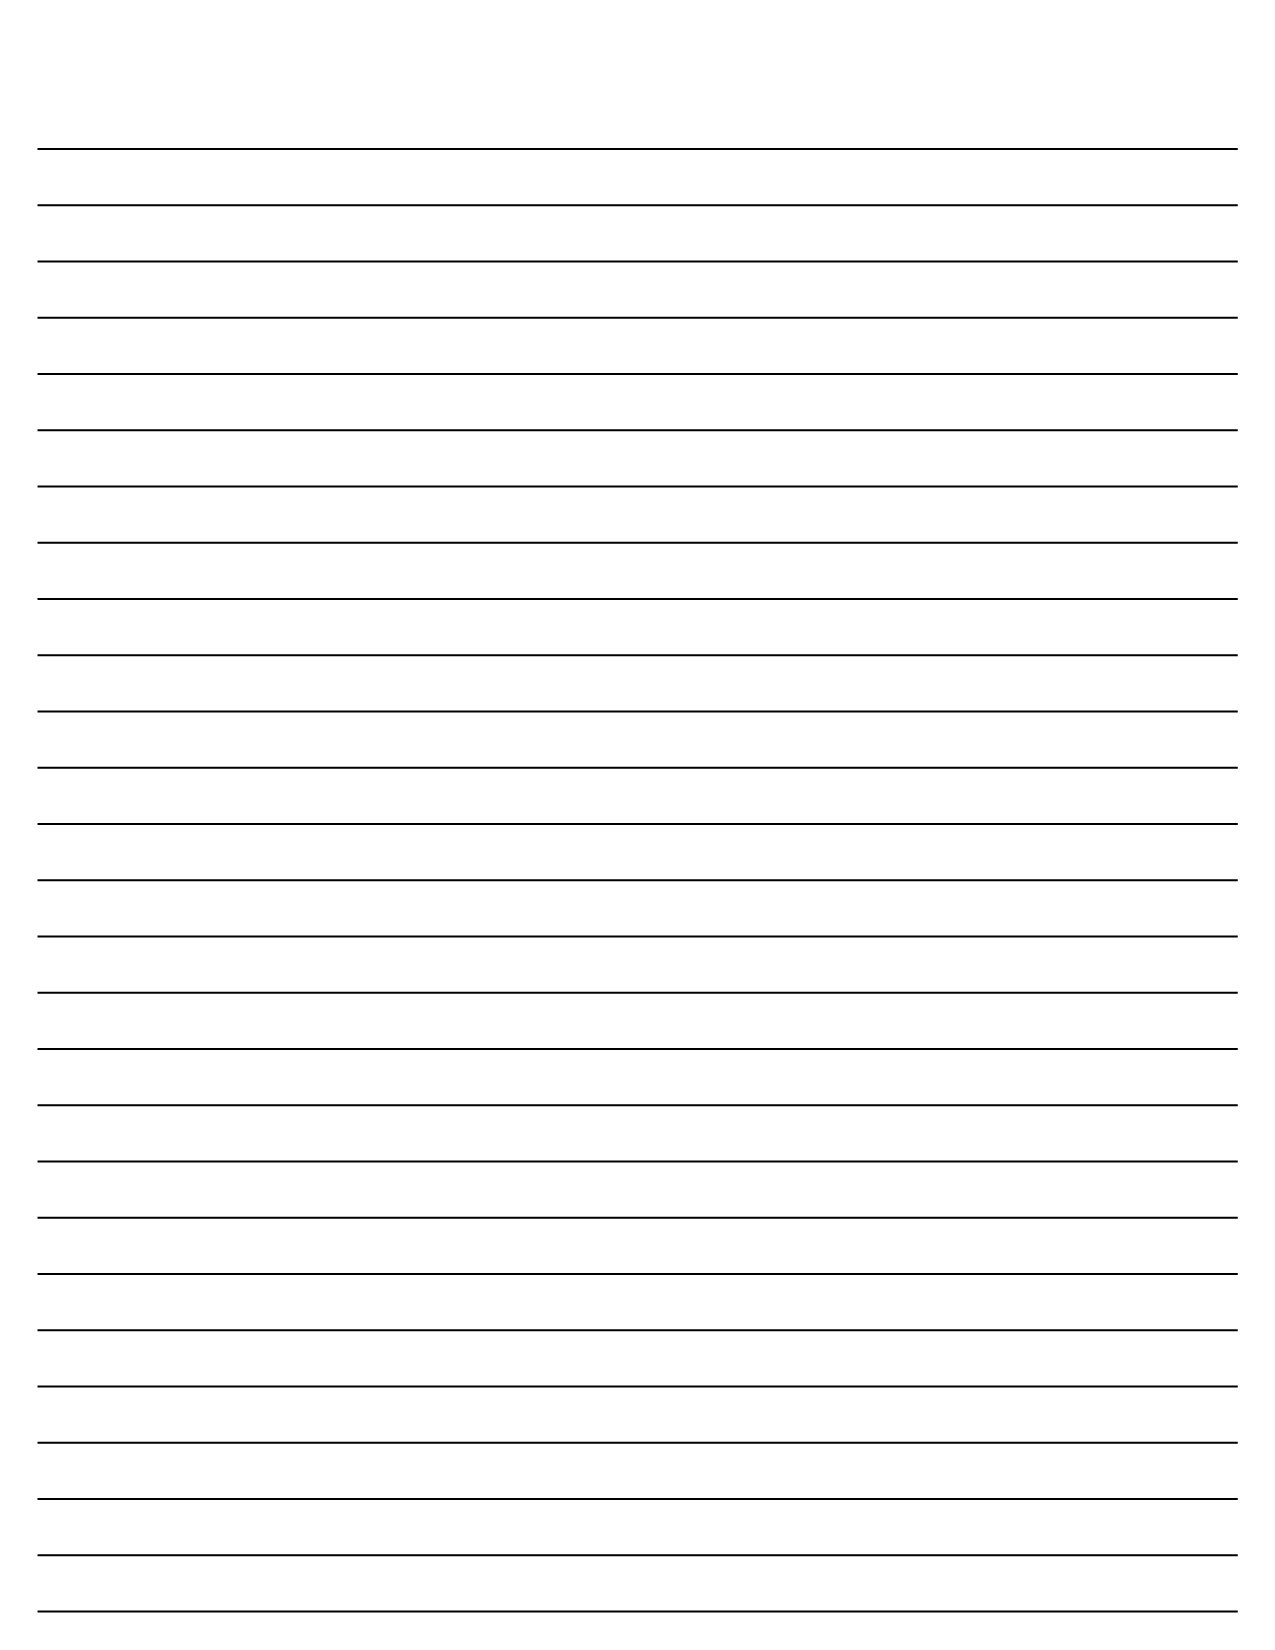 Lined Writing Paper Online - Primary Handwriting Paper - Free Printable Lined Writing Paper